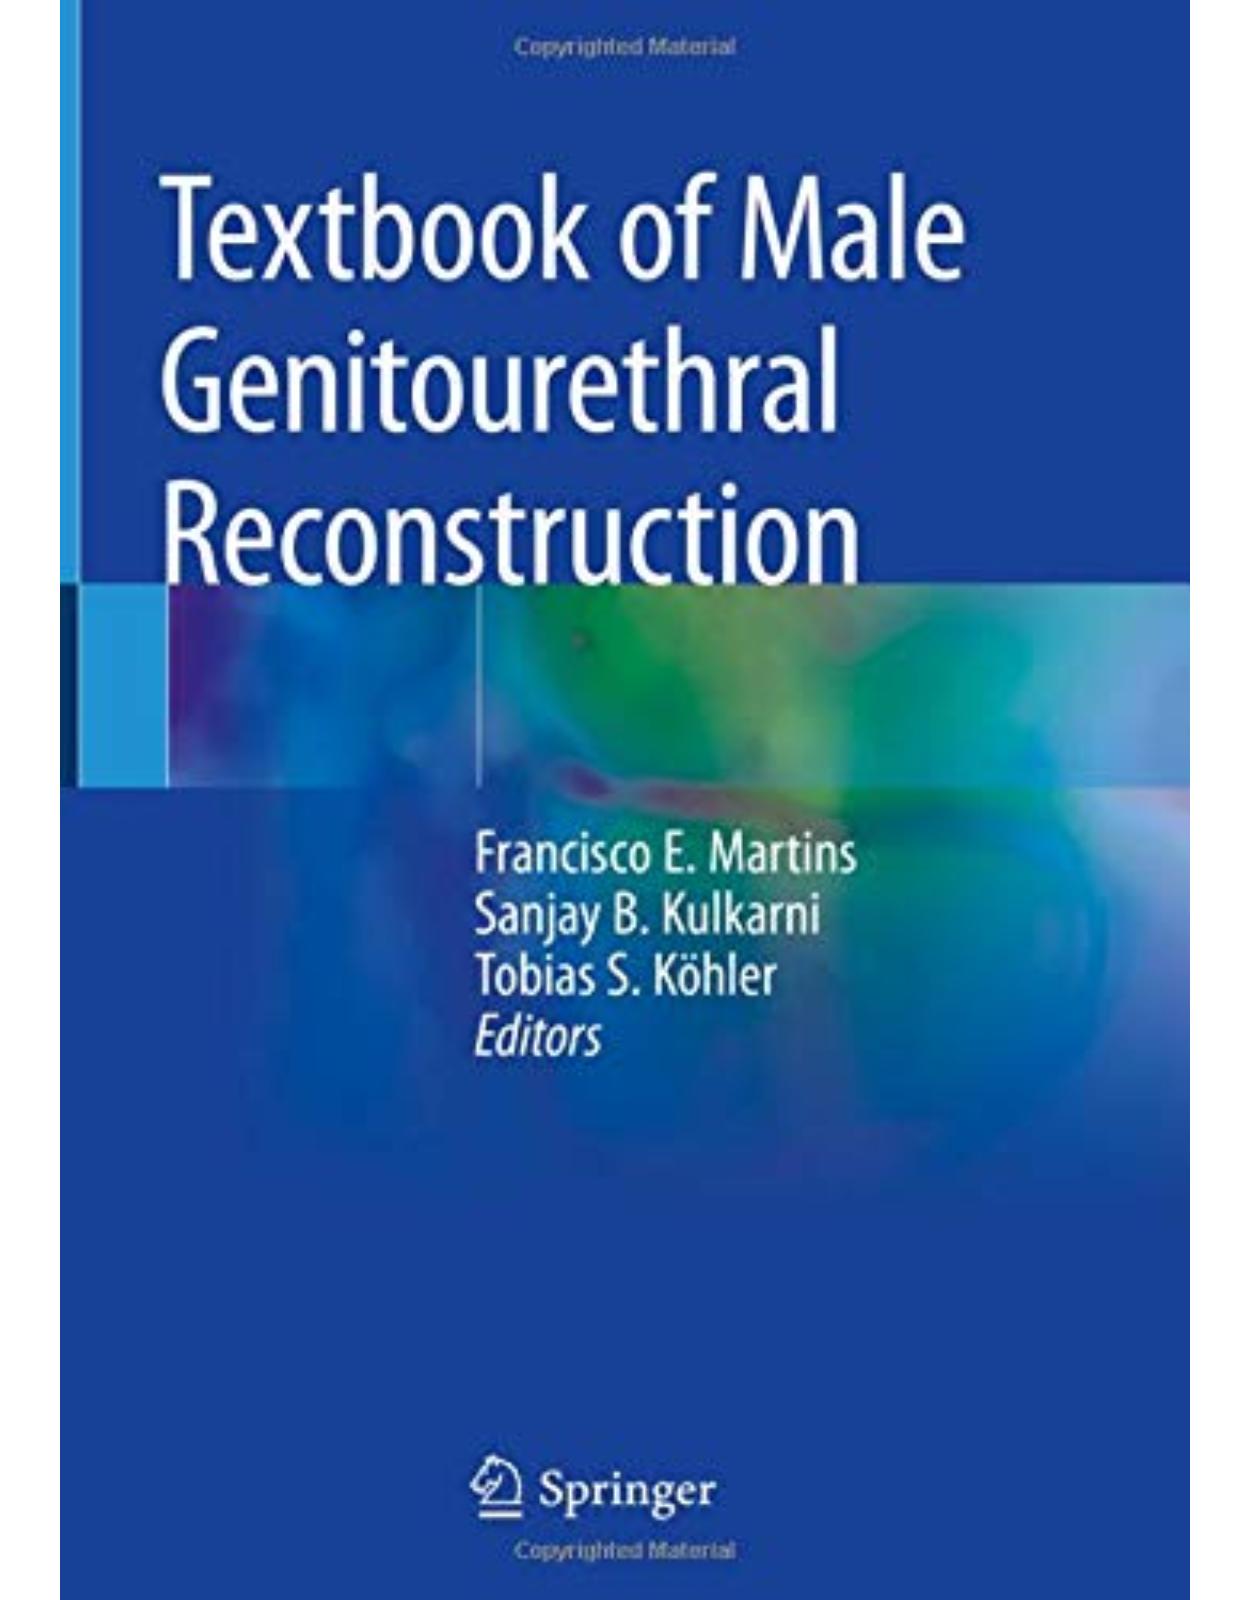 Textbook of Male Genitourethral Reconstruction